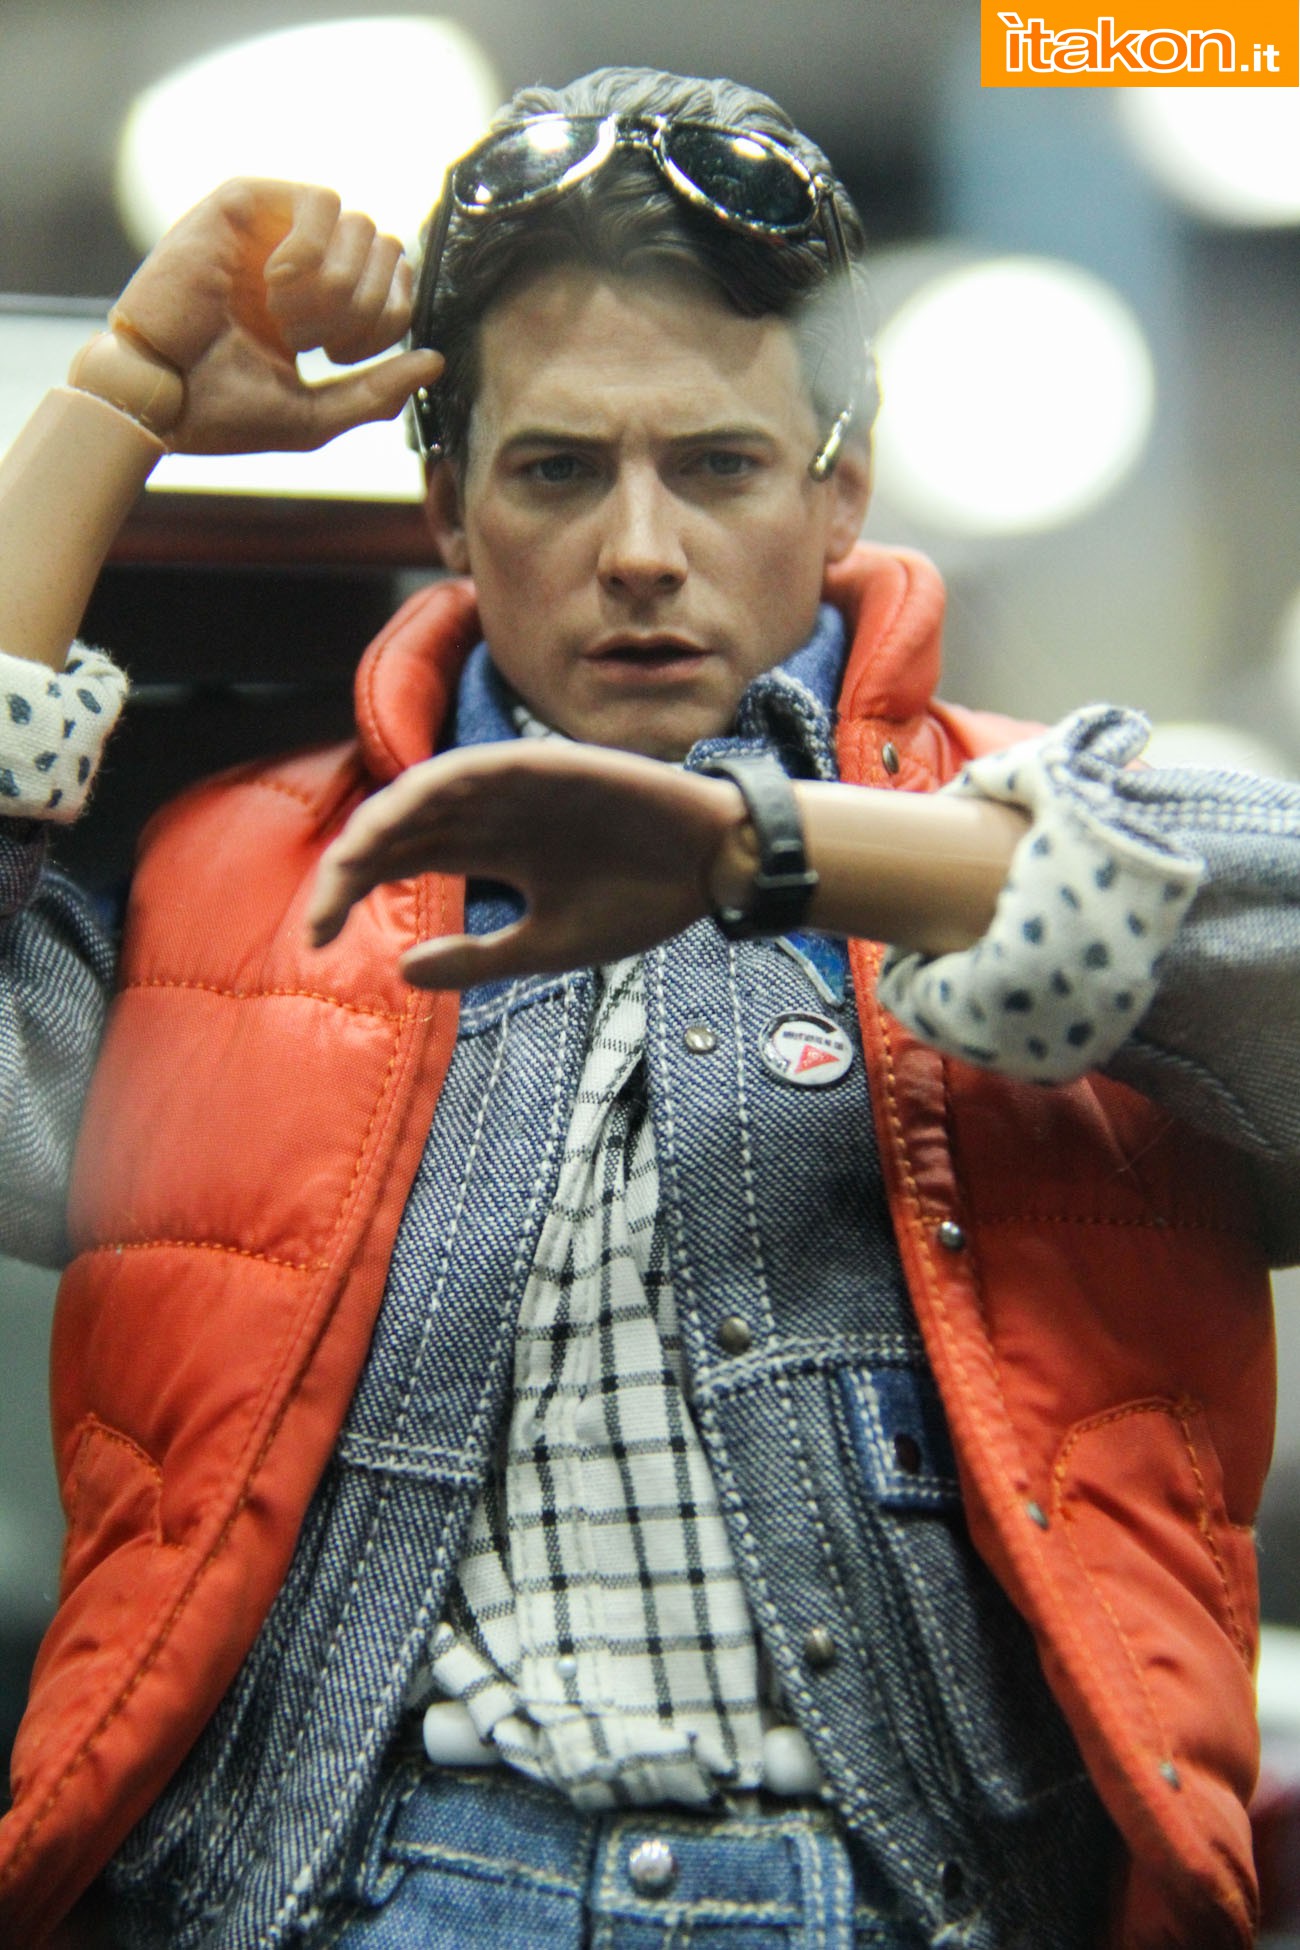 sdcc2014-hot-toys-booth-81.jpg